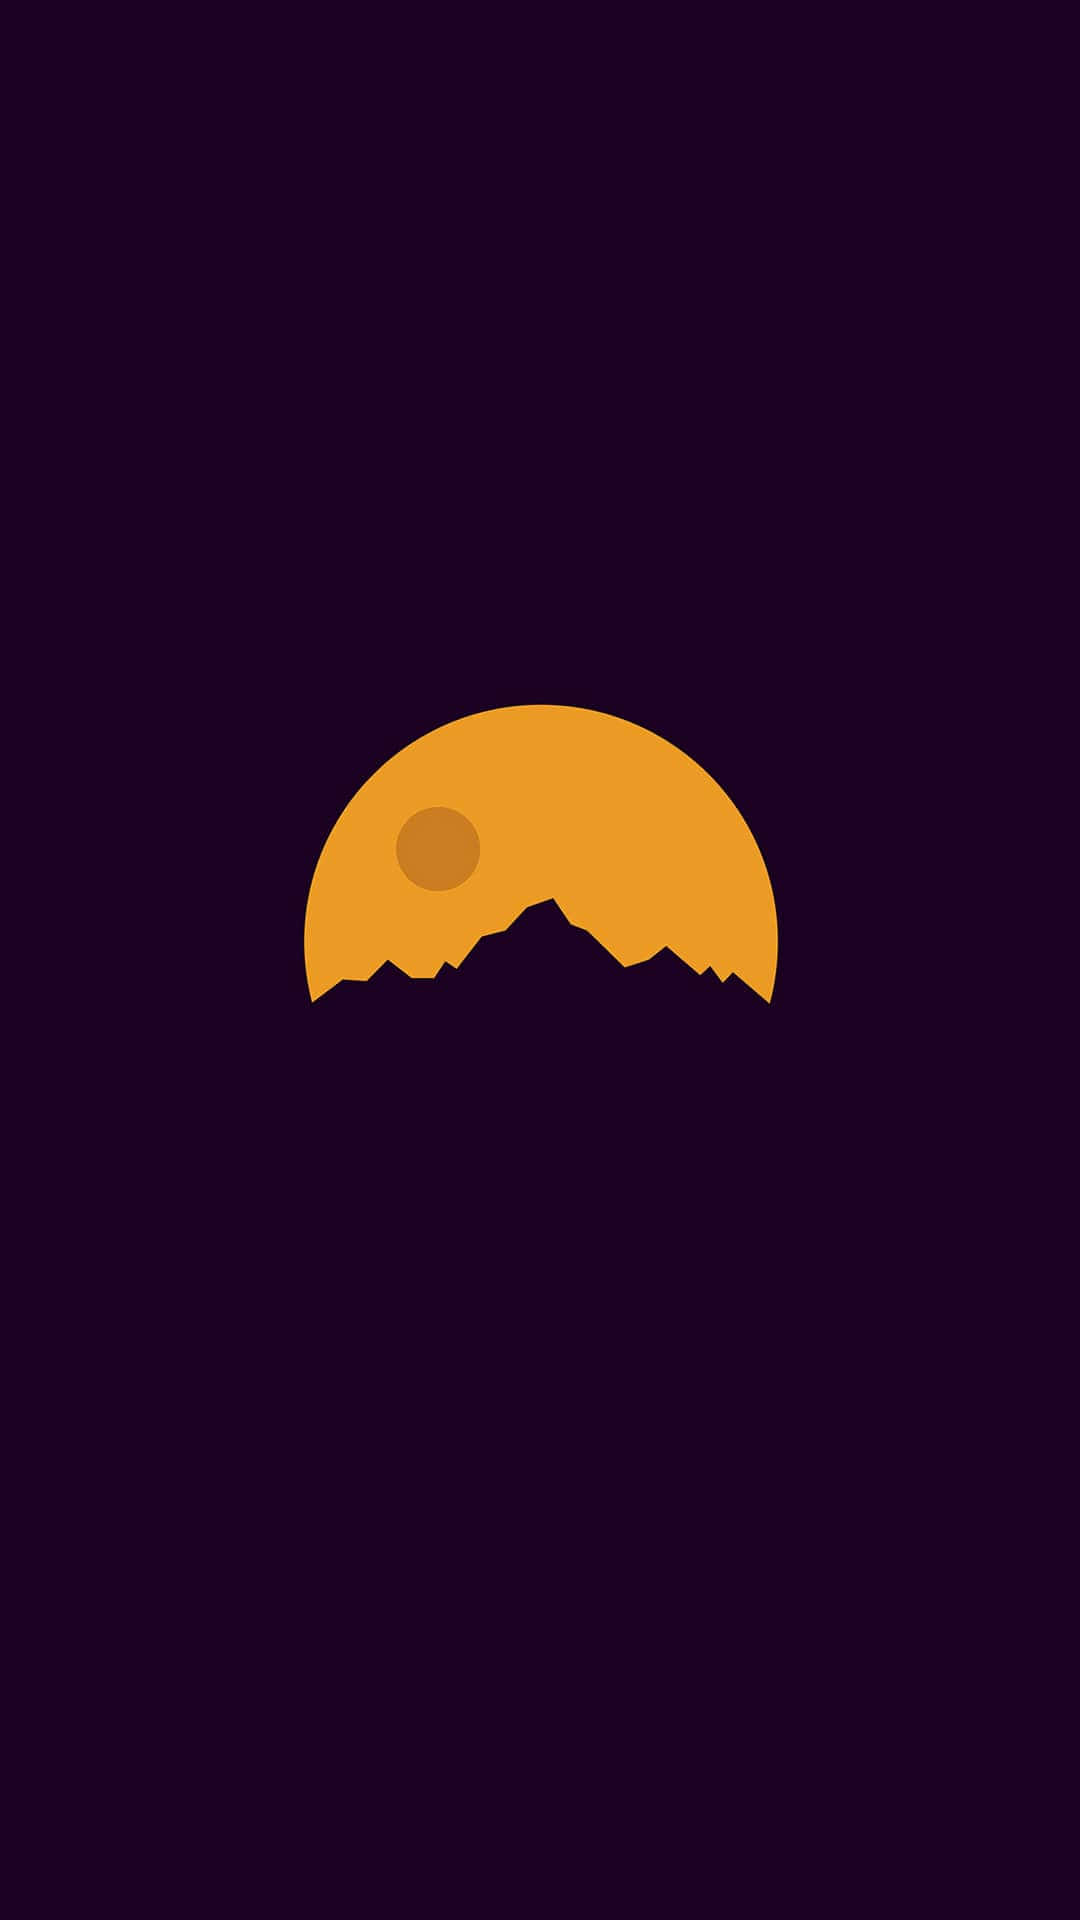 A Mountain Silhouette With A Sunset Behind It Wallpaper